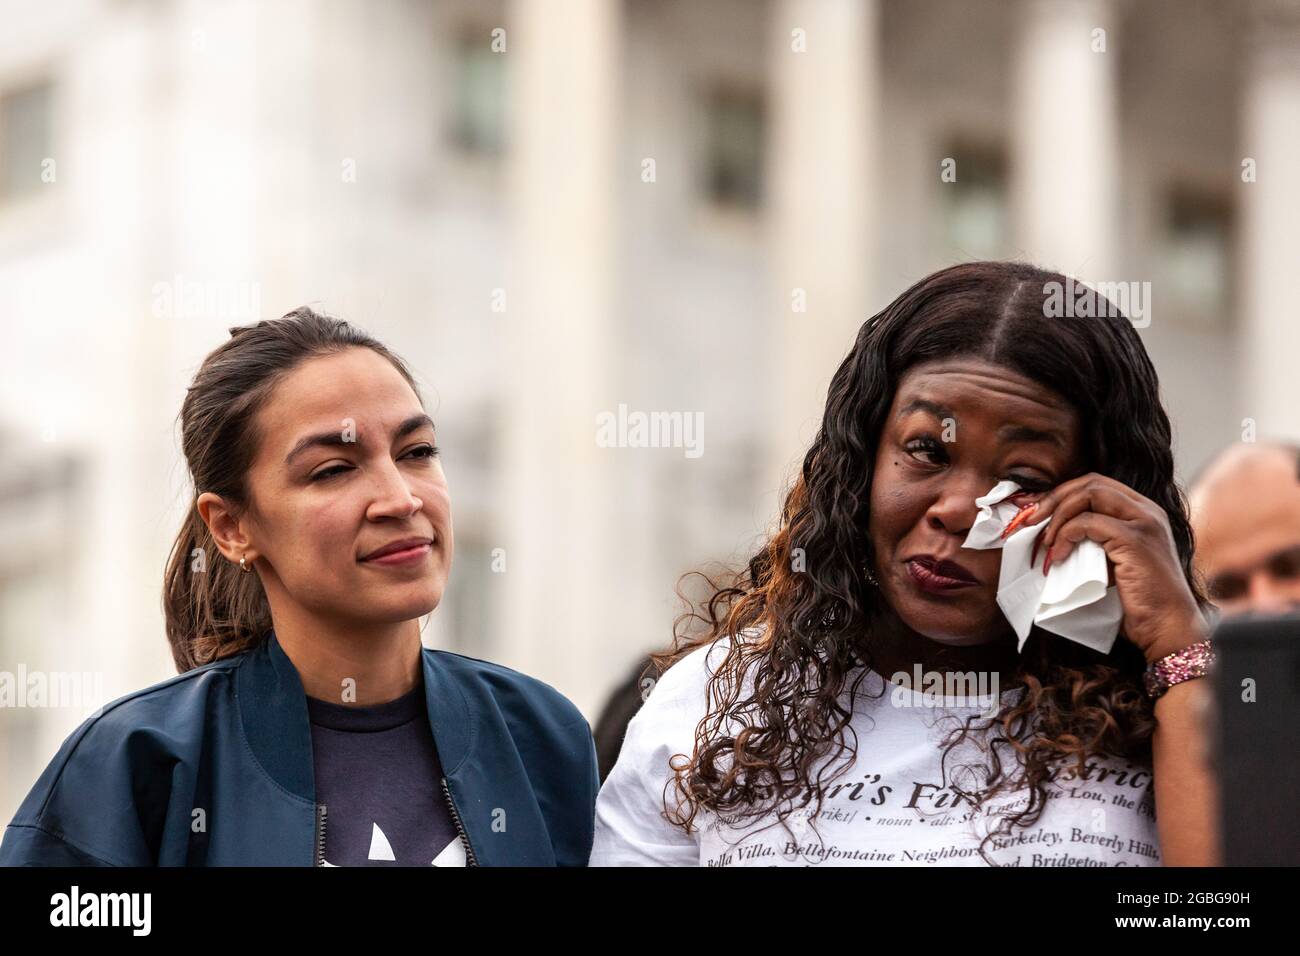 Washington, DC, USA, 3 August 2021.  Pictured: Congresswoman Cori Bush (D-MO) sheds tears of joy with Alexandria Ocasio-Cortez (D-NY) at a press conference announcing the Center for Disease Control’s new 60-day pandemic eviction moratorium at the Capitol.  Credit: Allison Bailey / Alamy Live News Stock Photo